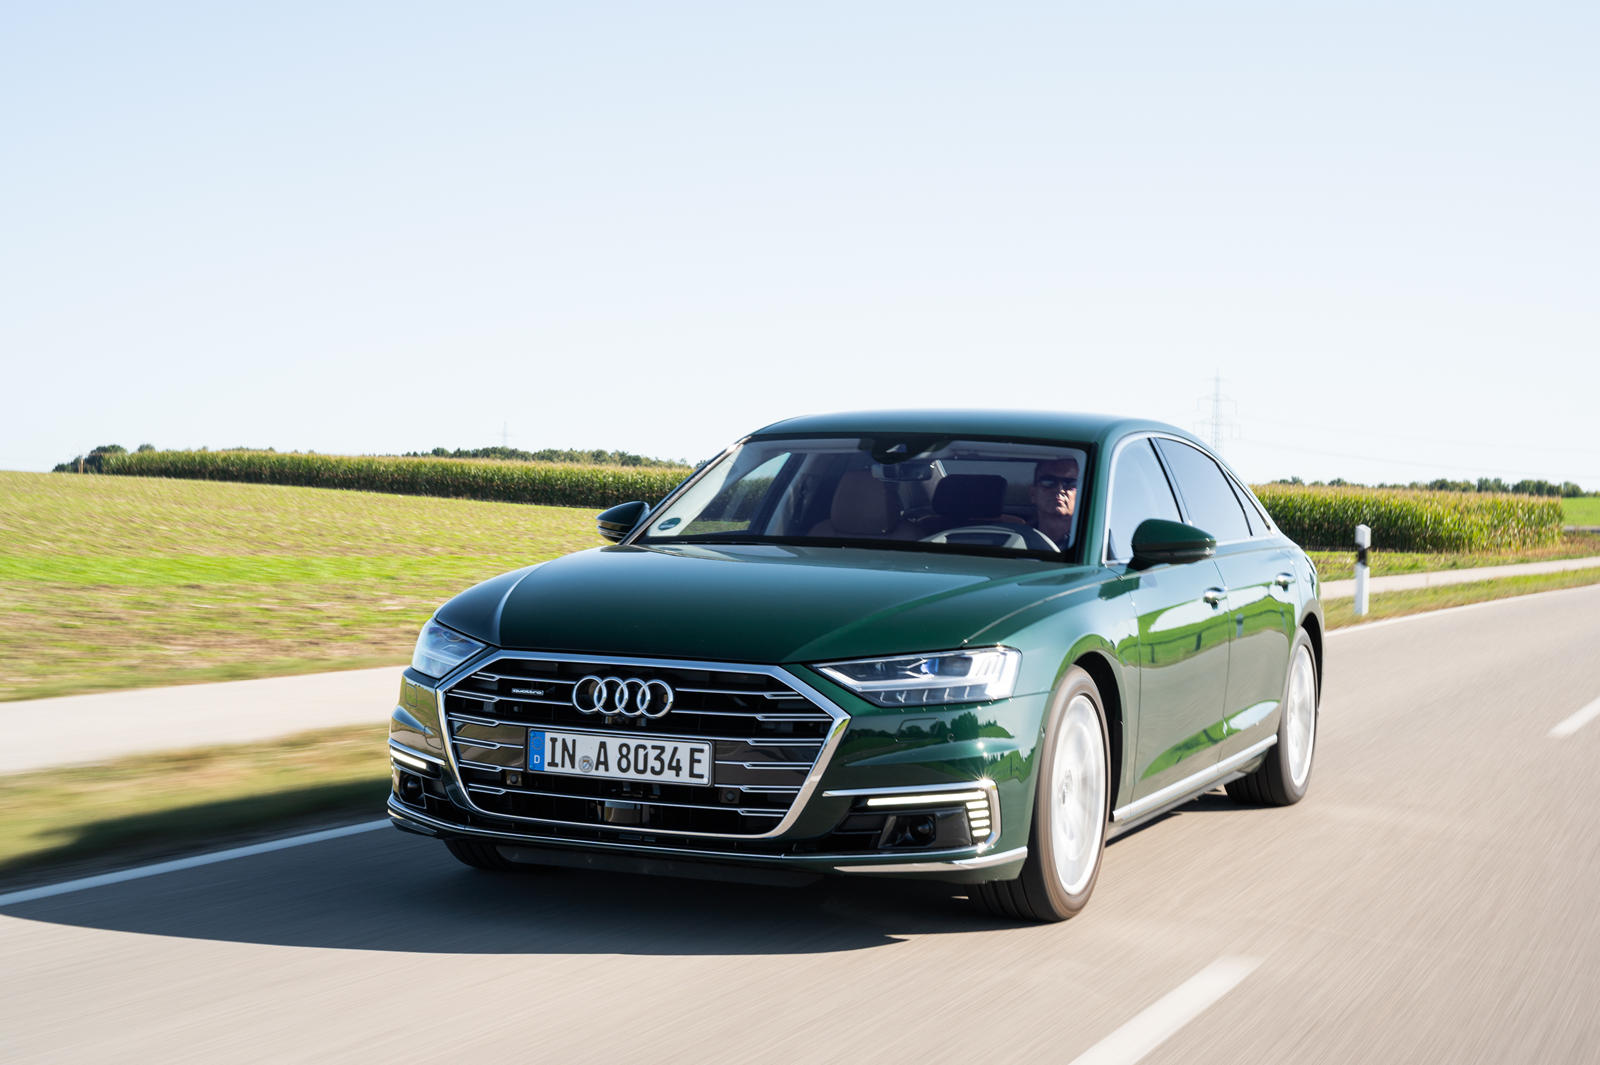 2021 Audi A8 Hybrid Front View Driving